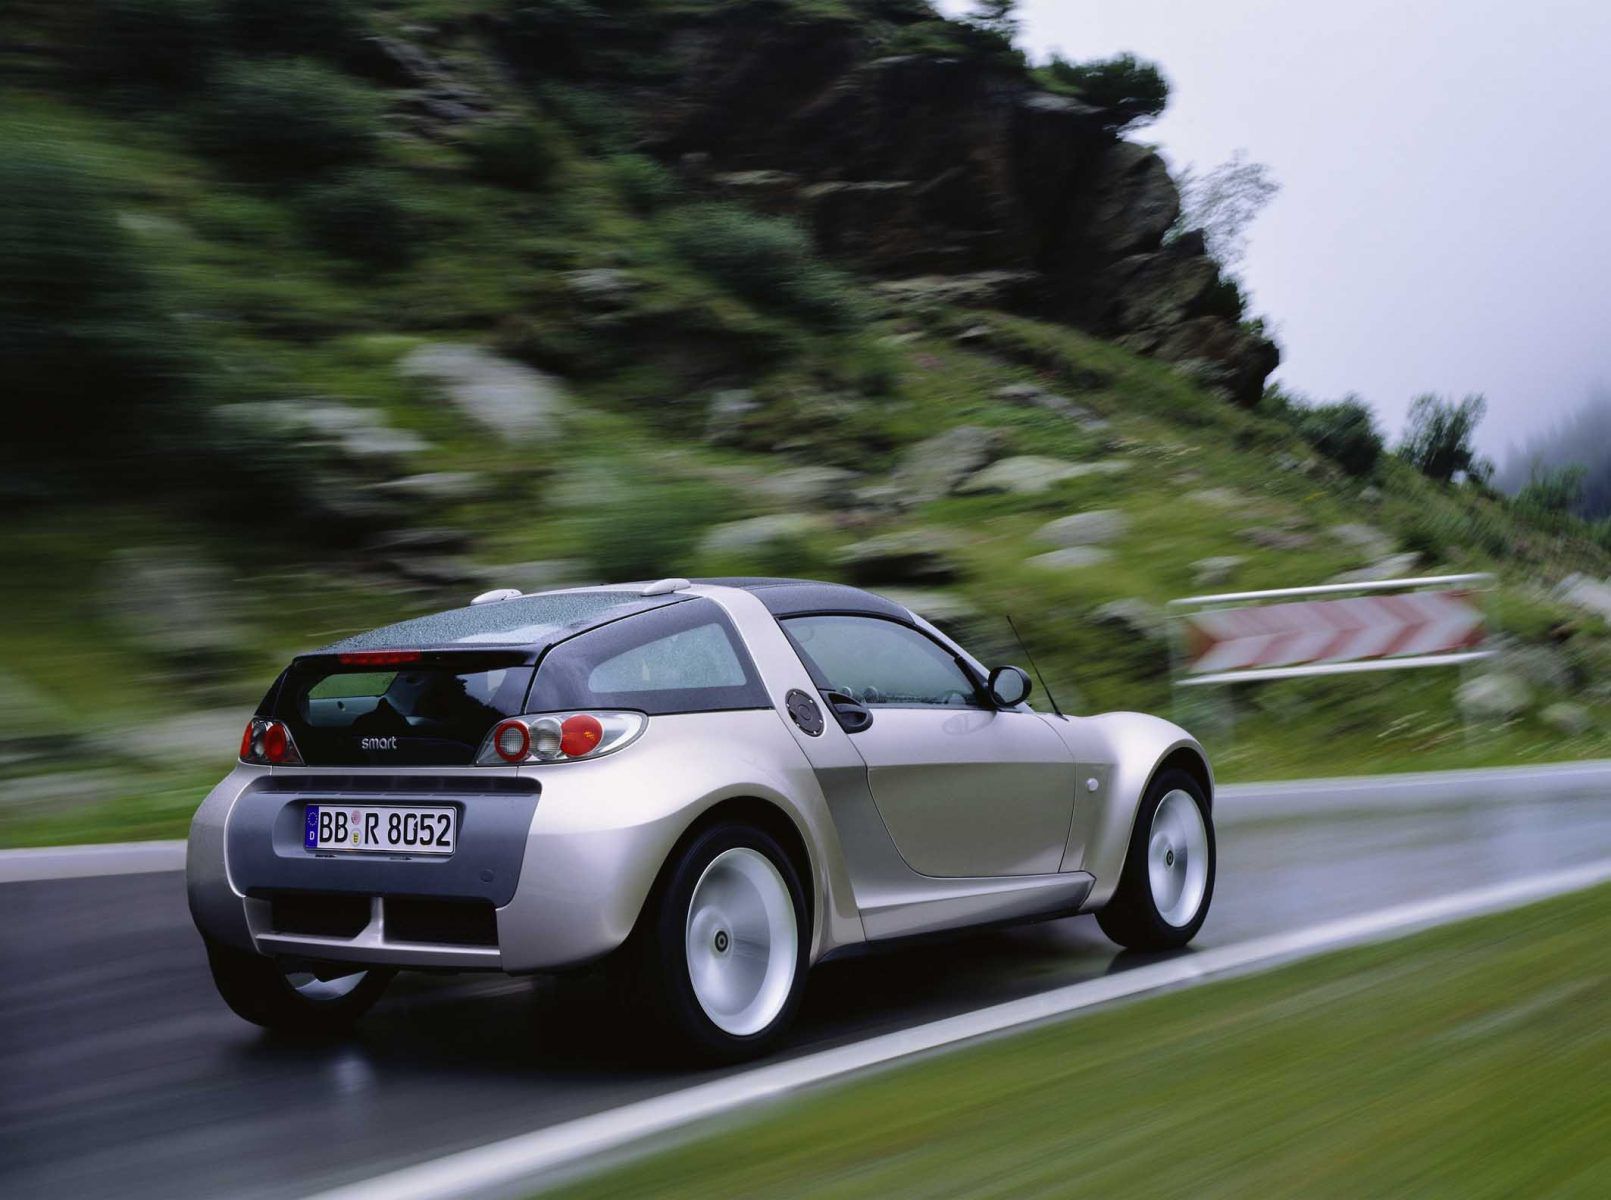 Rear view of a silver Smart Roadster driving on a road